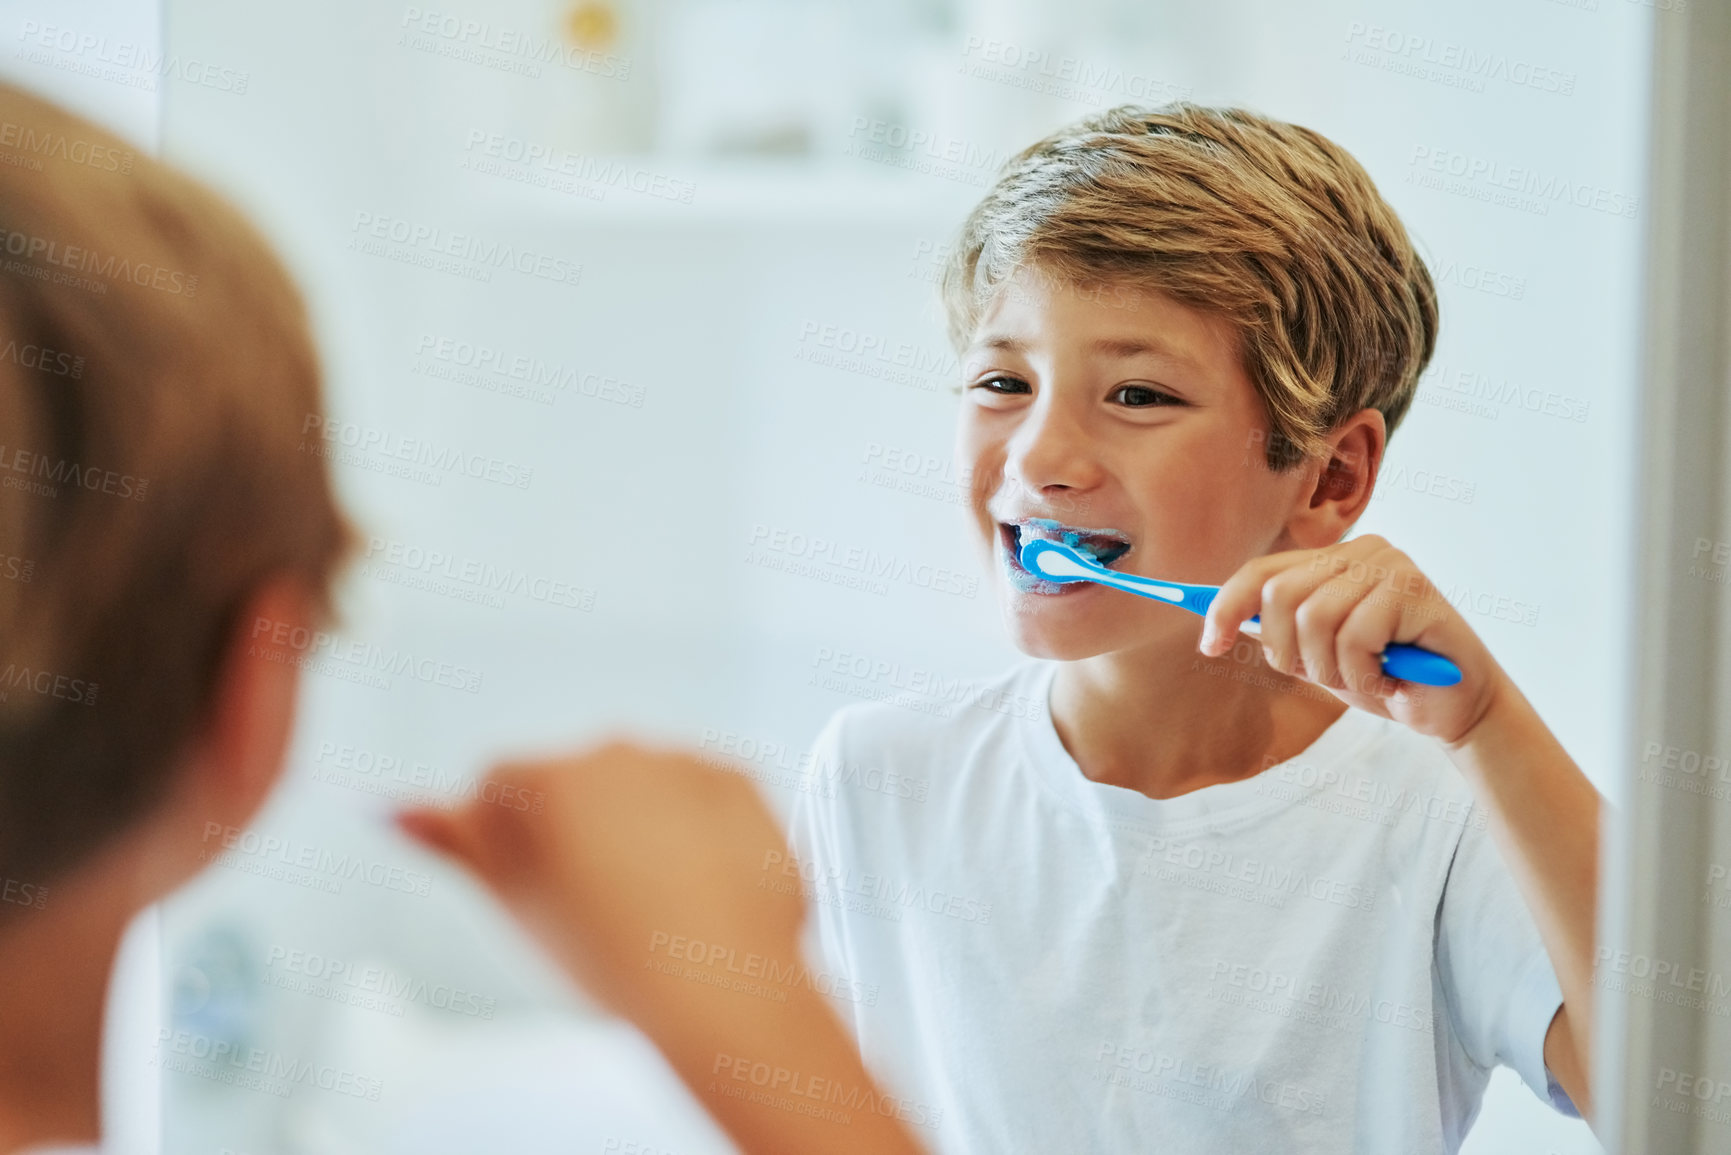 Buy stock photo Shot of a cheerful young boy looking at his reflection in a mirror while brushing his teeth in the bathroom at home during the day